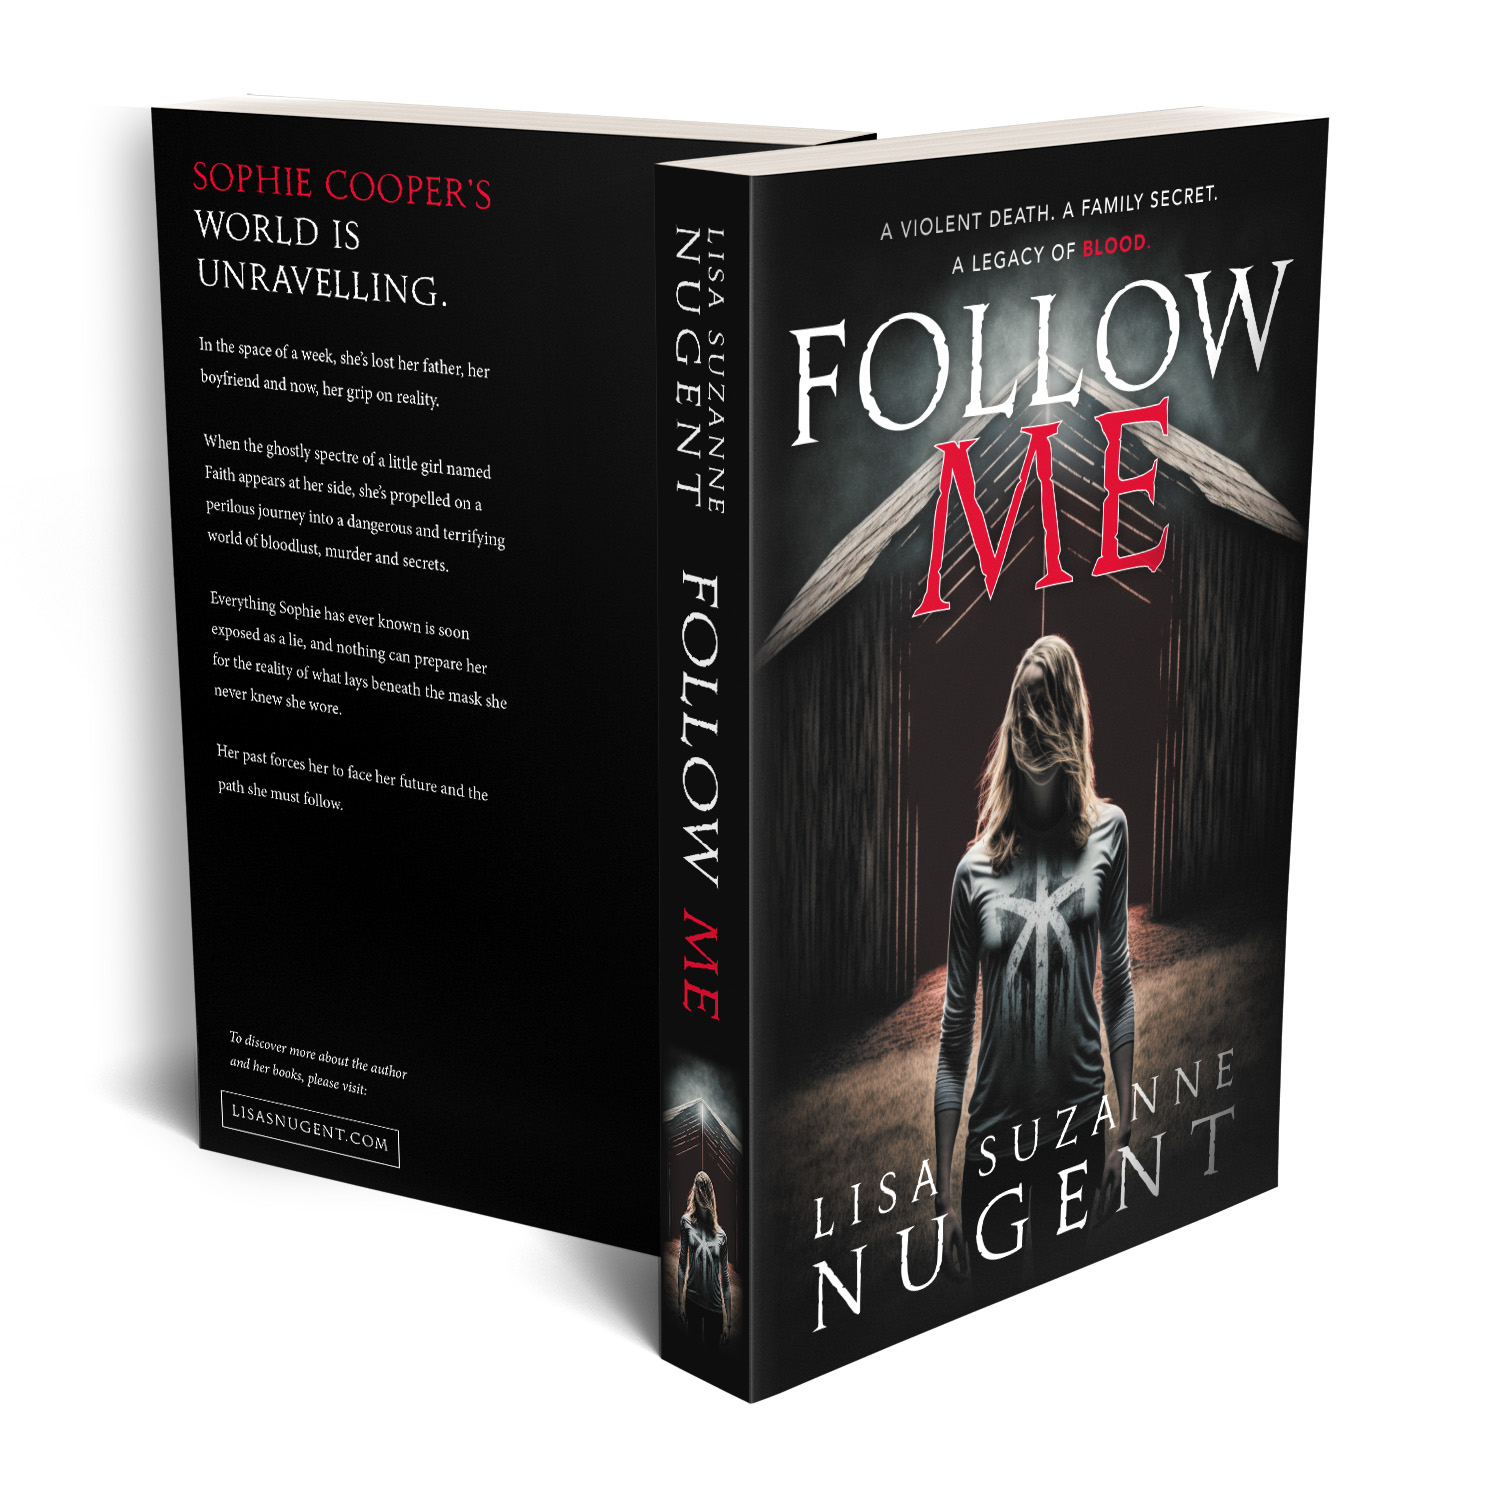 'Follow Me' is a skin-chilling modern horror novel. The author is Lisa Suzanne Nugent. The book cover and interior design are by Mark Thomas. To learn more about what Mark could do for your book, please visit coverness.com.